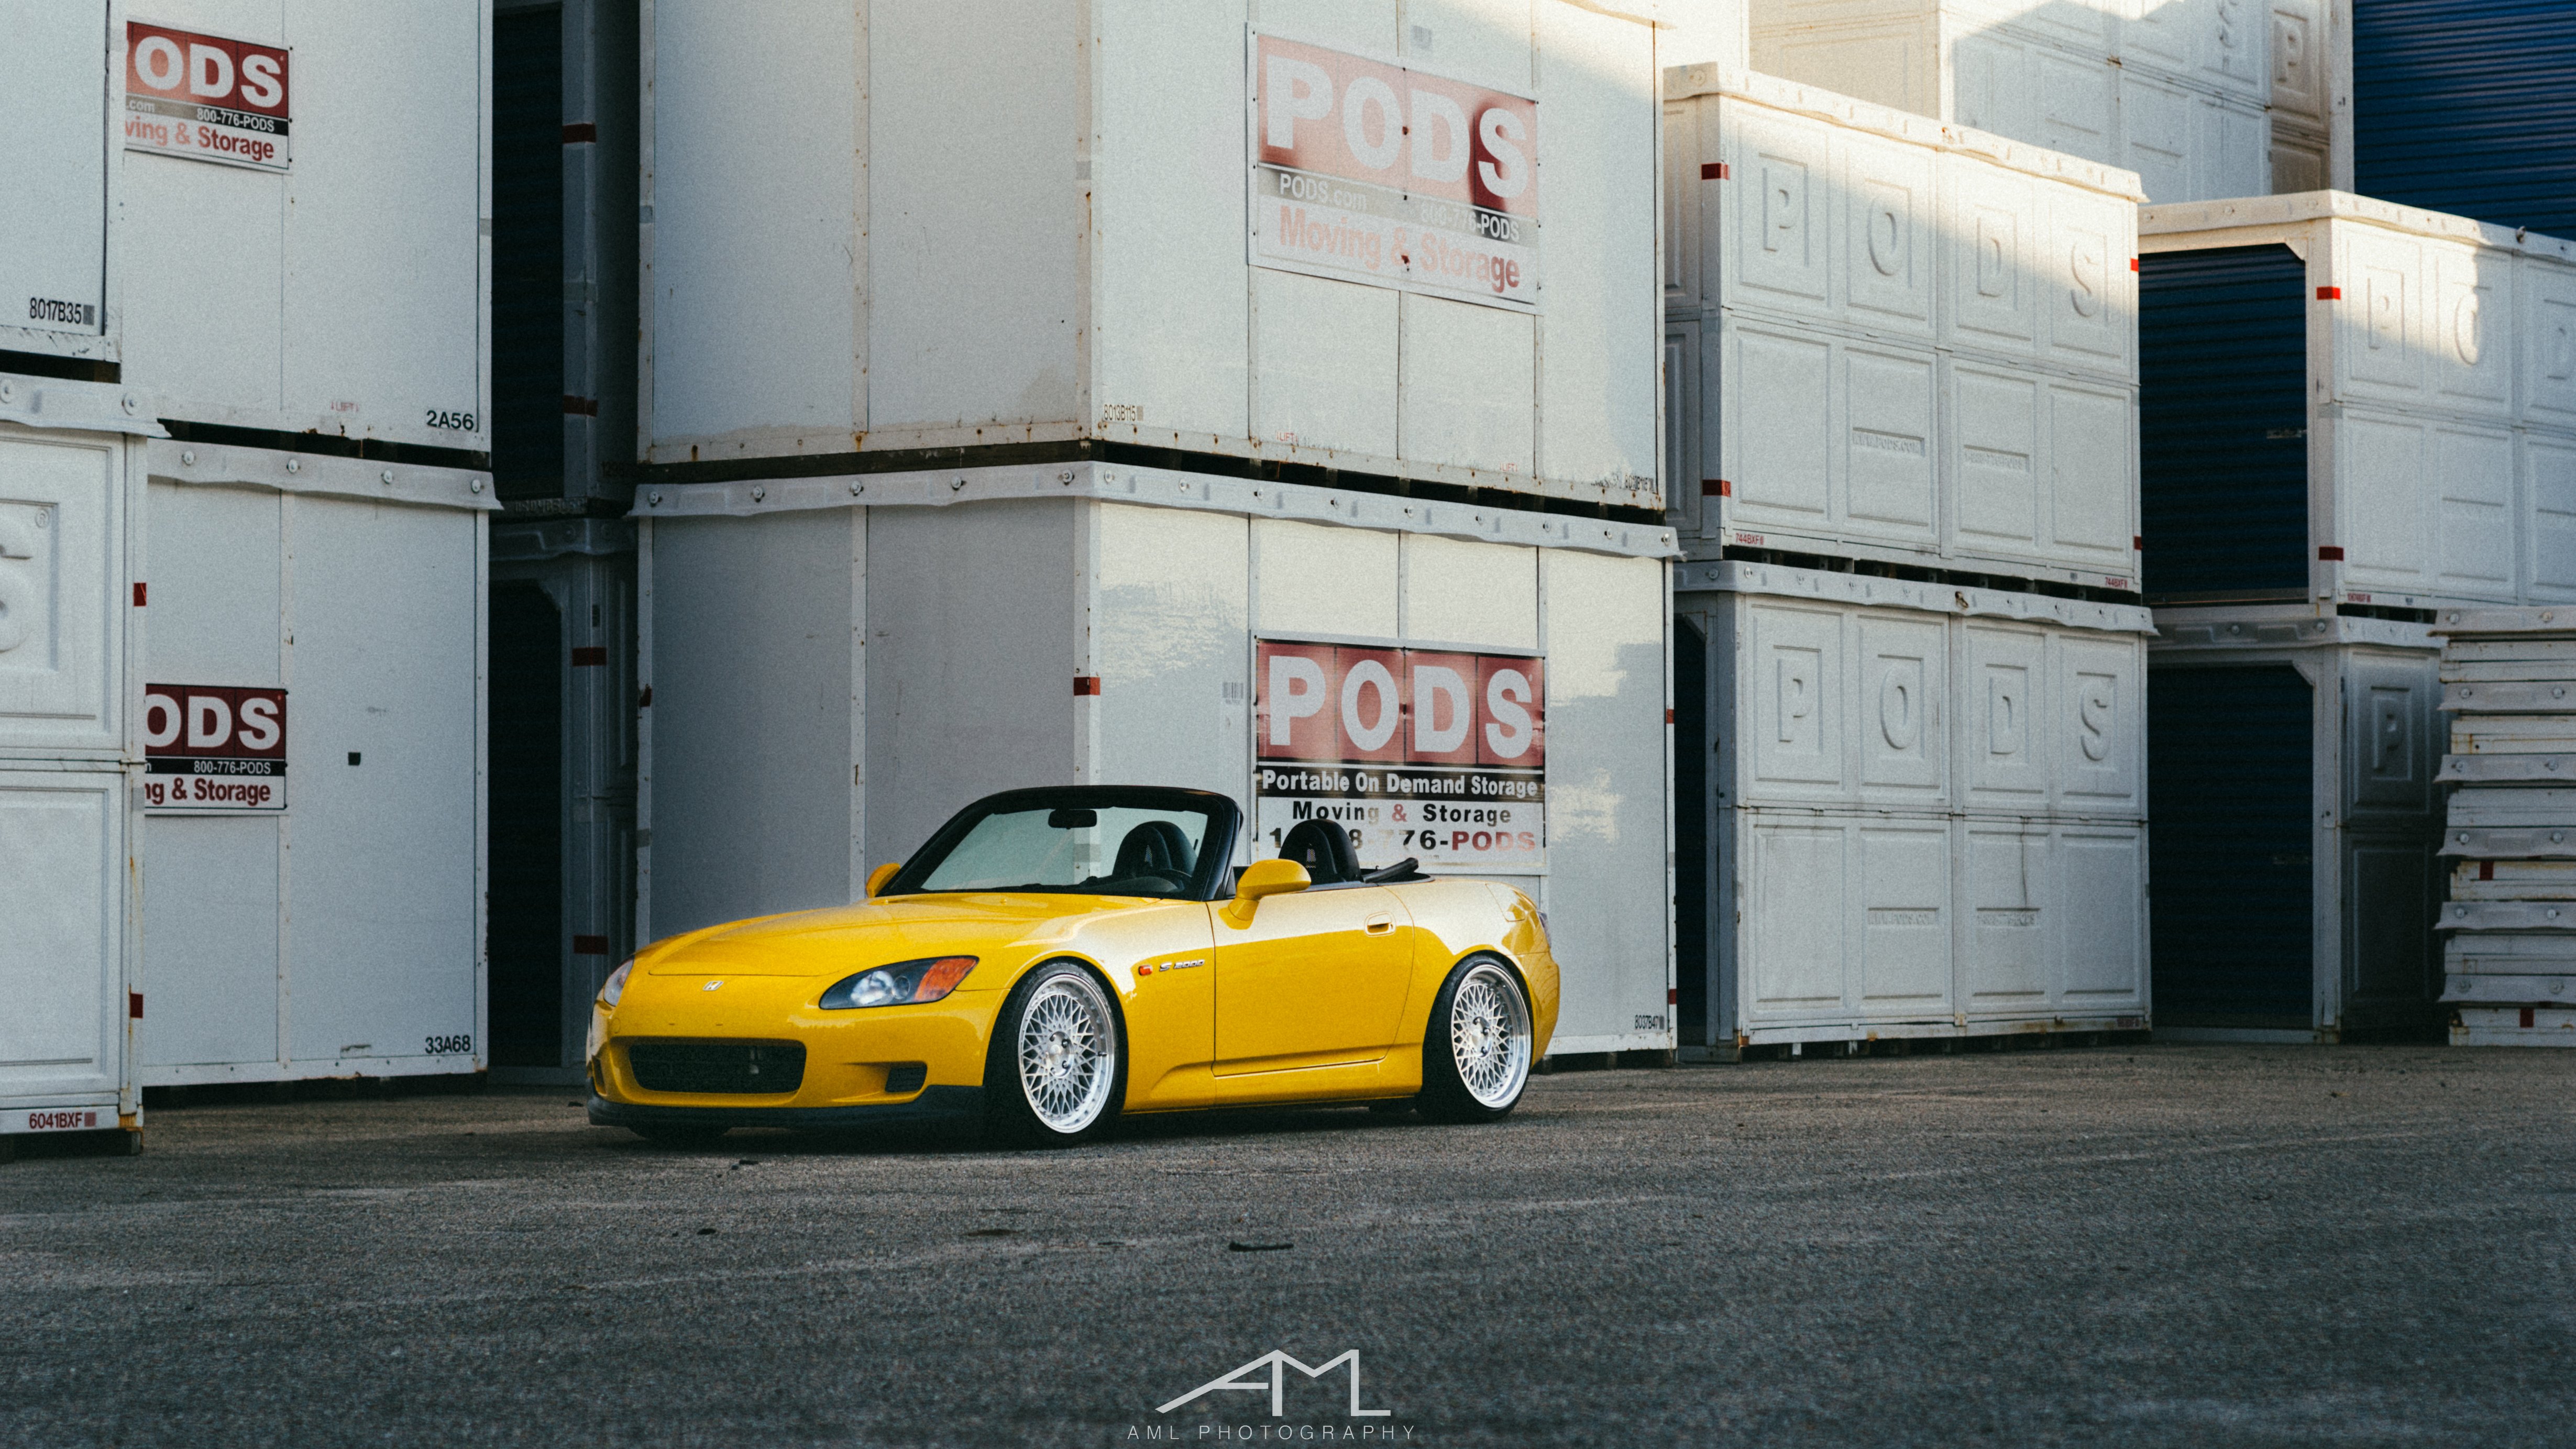 Yellow Convertible Honda S2000 with Aftermarket Headlights - Photo by Arlen Liverman